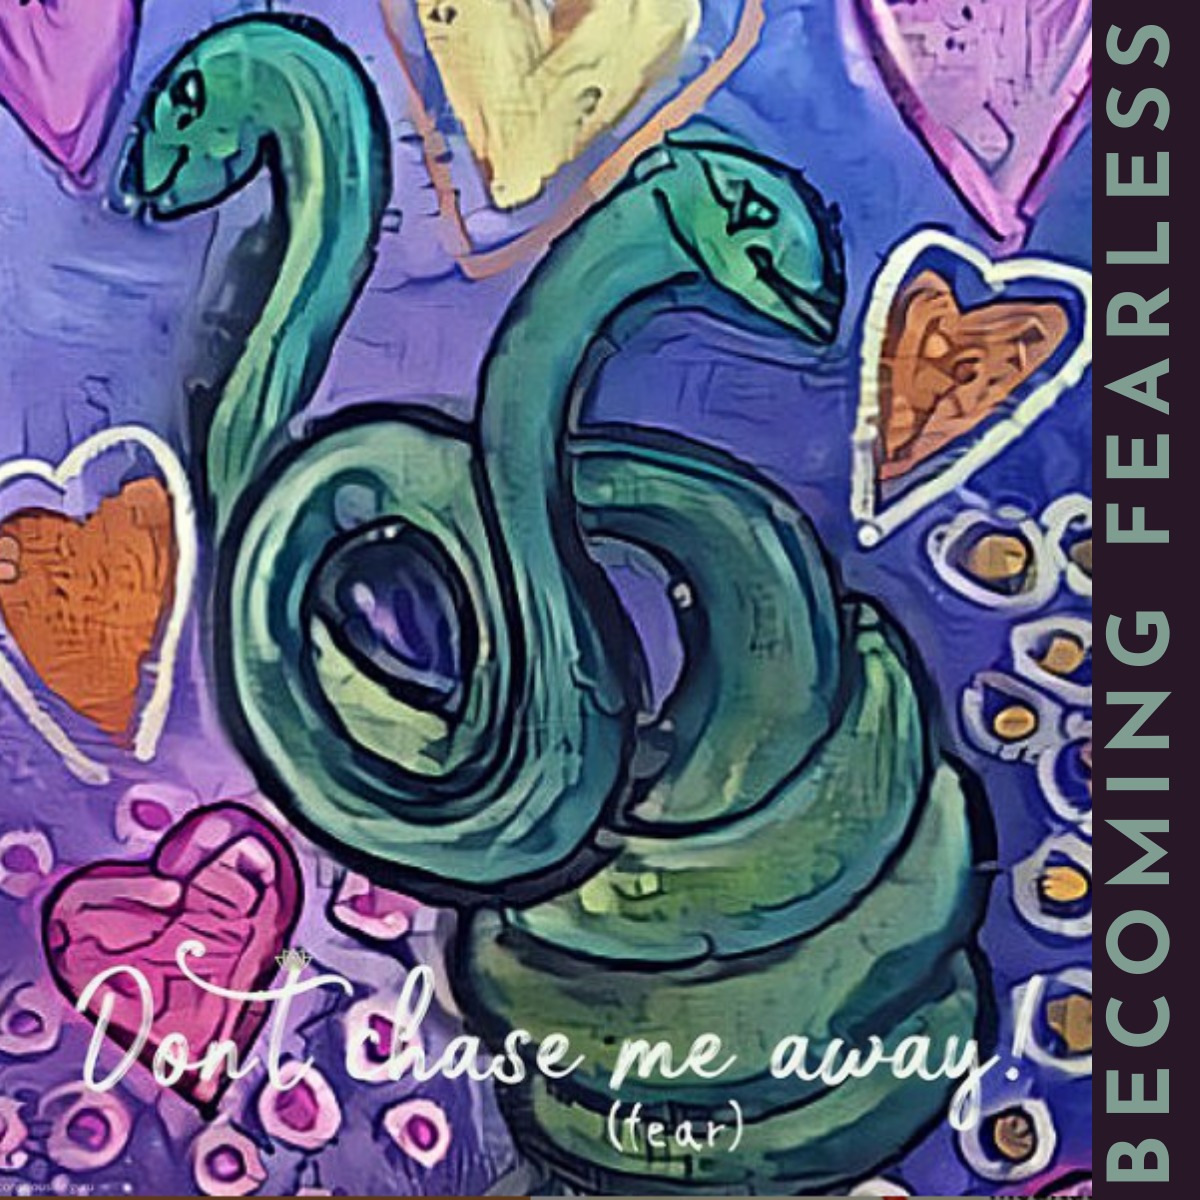 Becoming Fearless double snake with arts illustration about fear